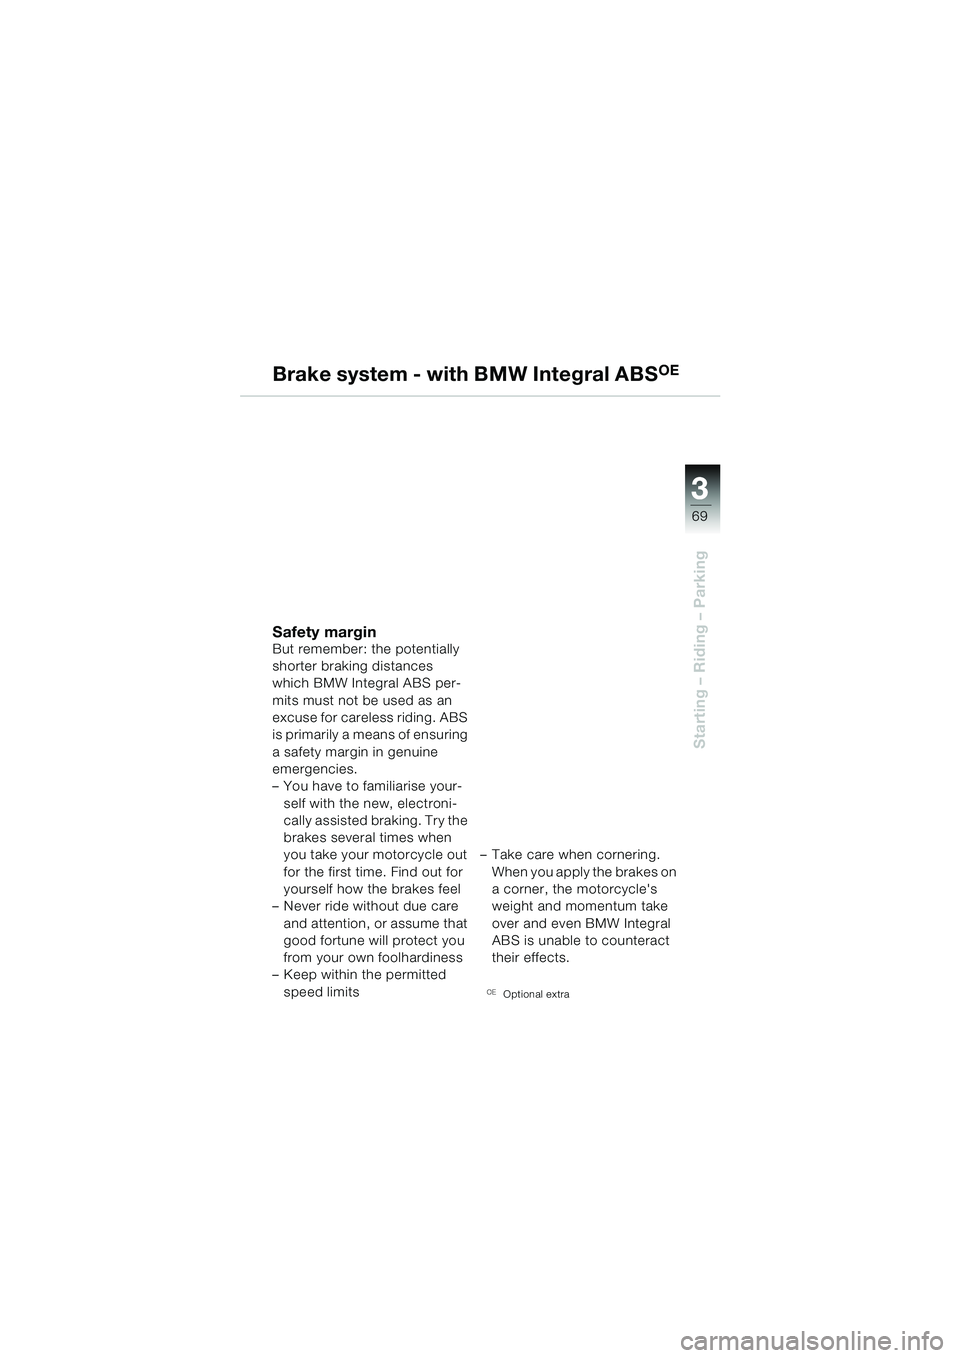 BMW MOTORRAD R 850 R 2004  Riders Manual (in English) 3
69
3
Starting – Riding – Parking
Brake system - with BMW Integral ABSOE
Safety marginBut remember: the potentially 
shorter braking distances 
which BMW Integral ABS per-
mits must not be used a